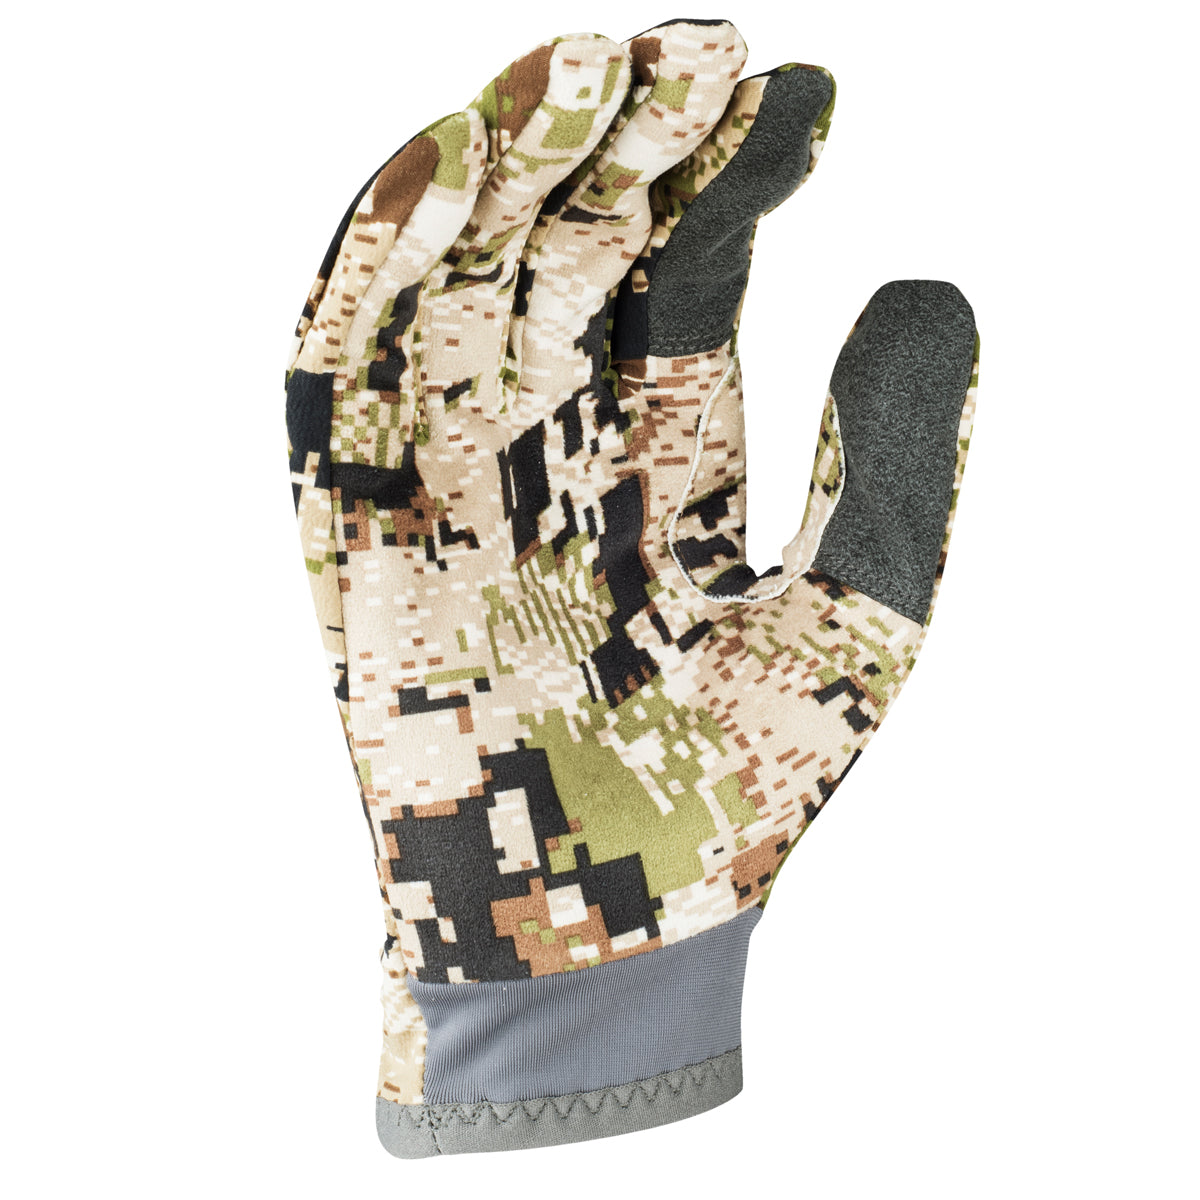 Sitka Ascent Glove in Sitka Ascent Glove by Sitka | Apparel - goHUNT Shop by GOHUNT | Sitka - GOHUNT Shop